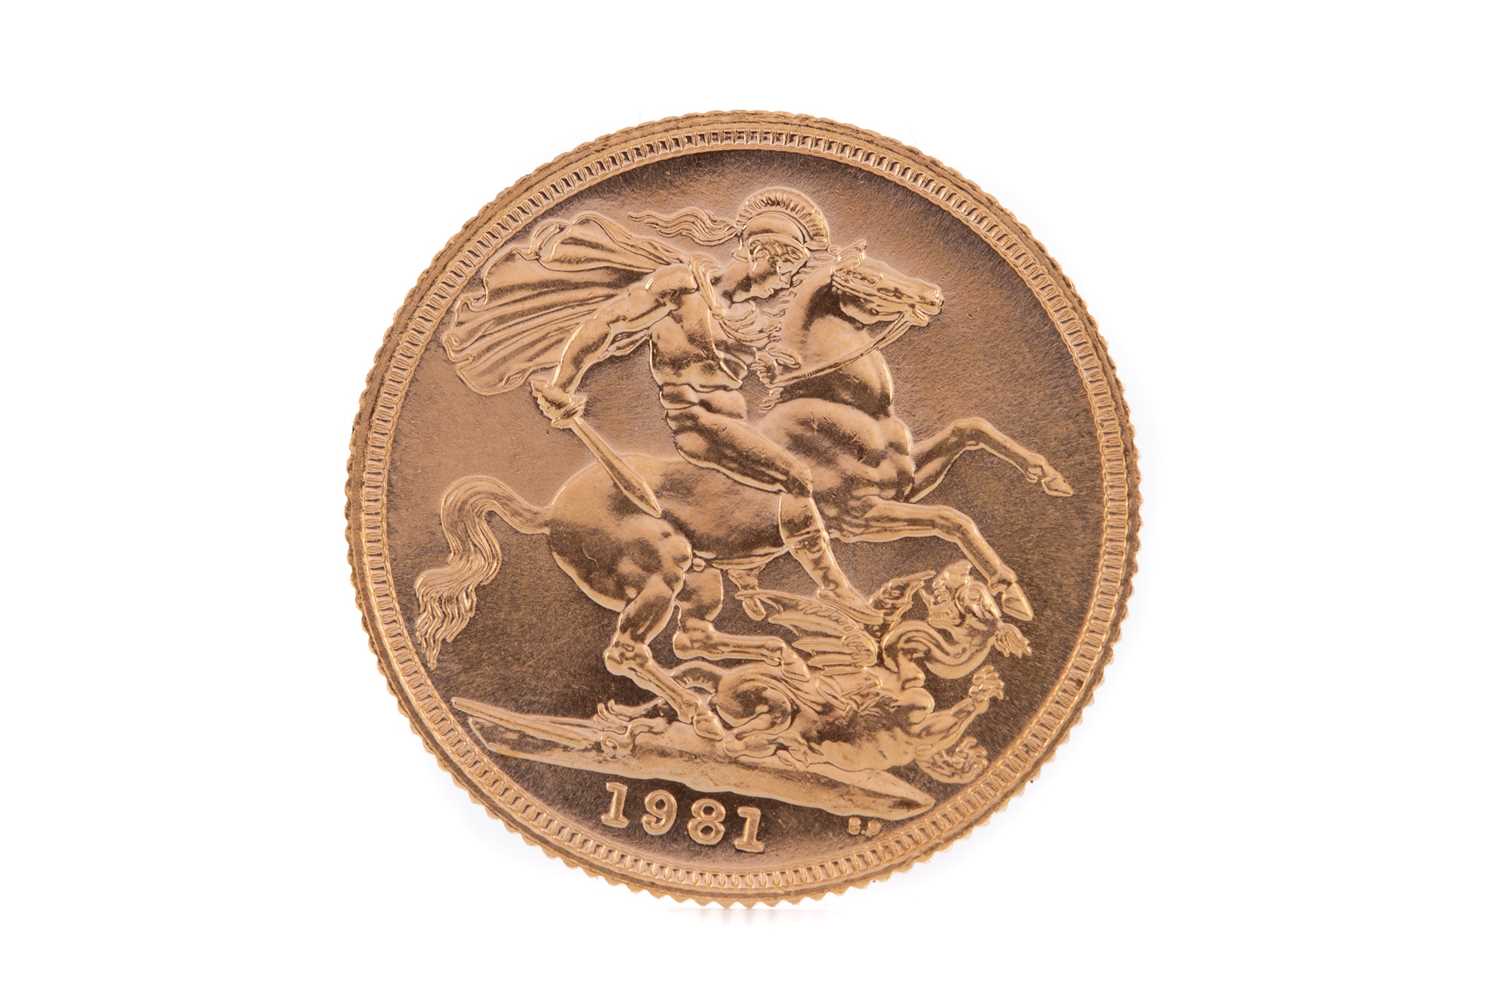 Lot 90 - AN ELIZABETH II GOLD SOVEREIGN DATED 1981